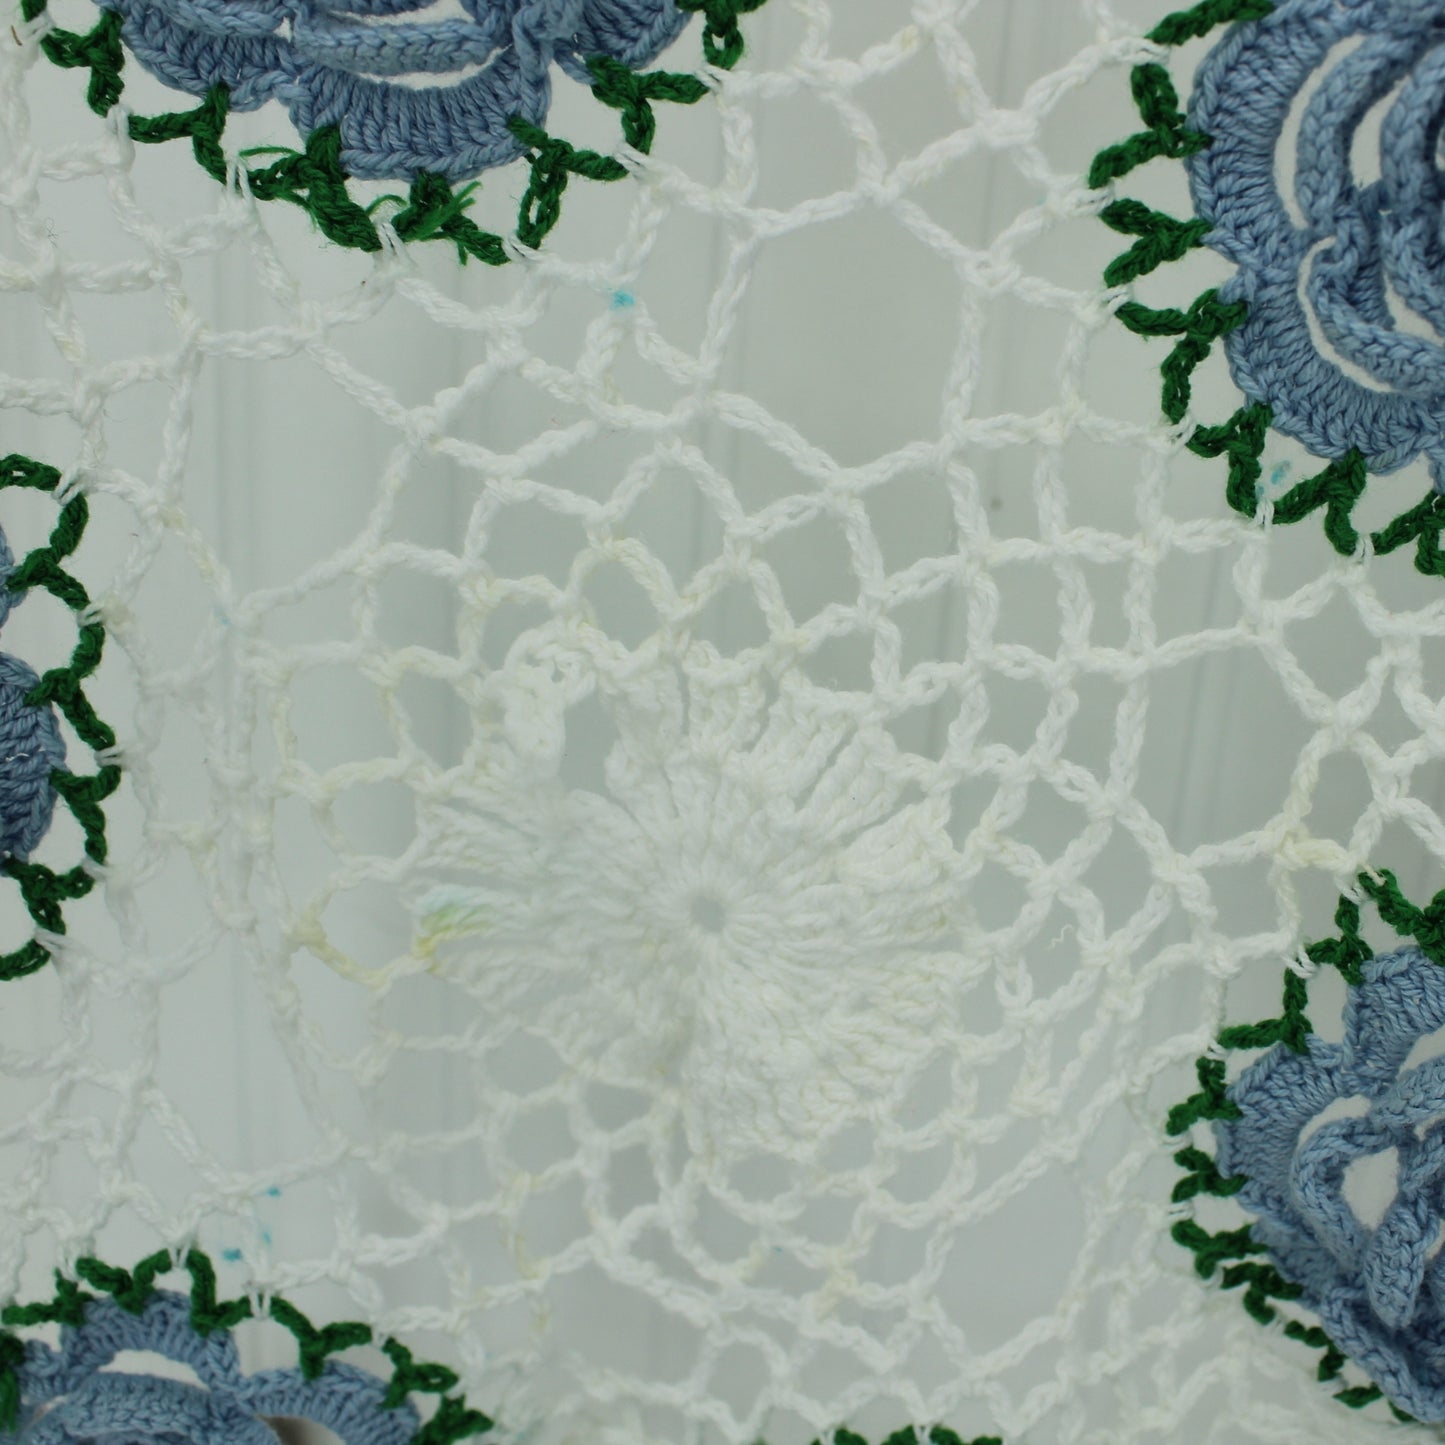 Pair Crochet Doilies  Raised Dimensional Flowers Grey Aqua and Blue on White stain loose stitch closeup